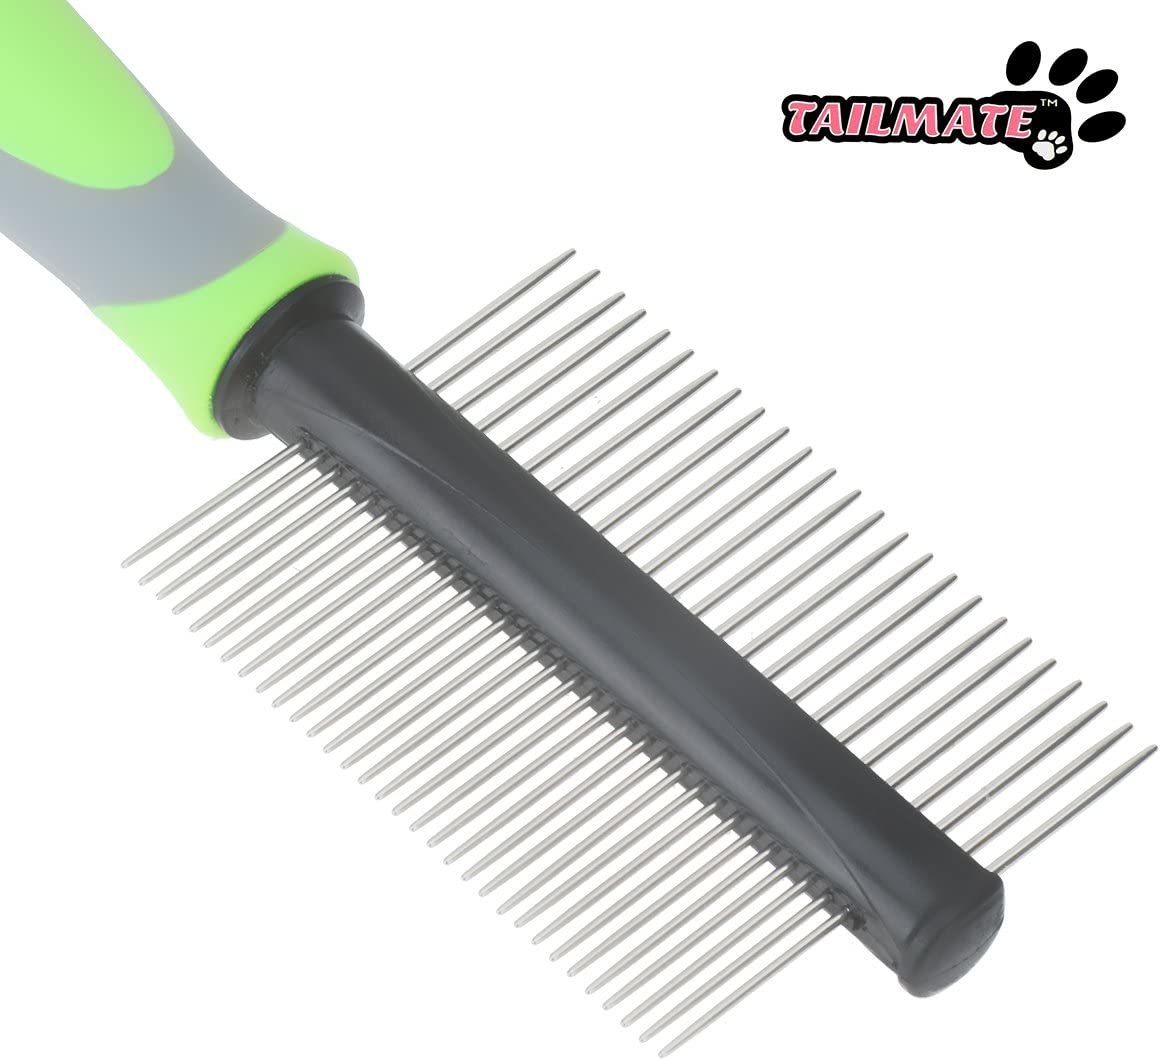 Tailmate両面ピンとBristleブラシコームfor Long Haired Dogs & Cats grooming comb グリーンの画像4